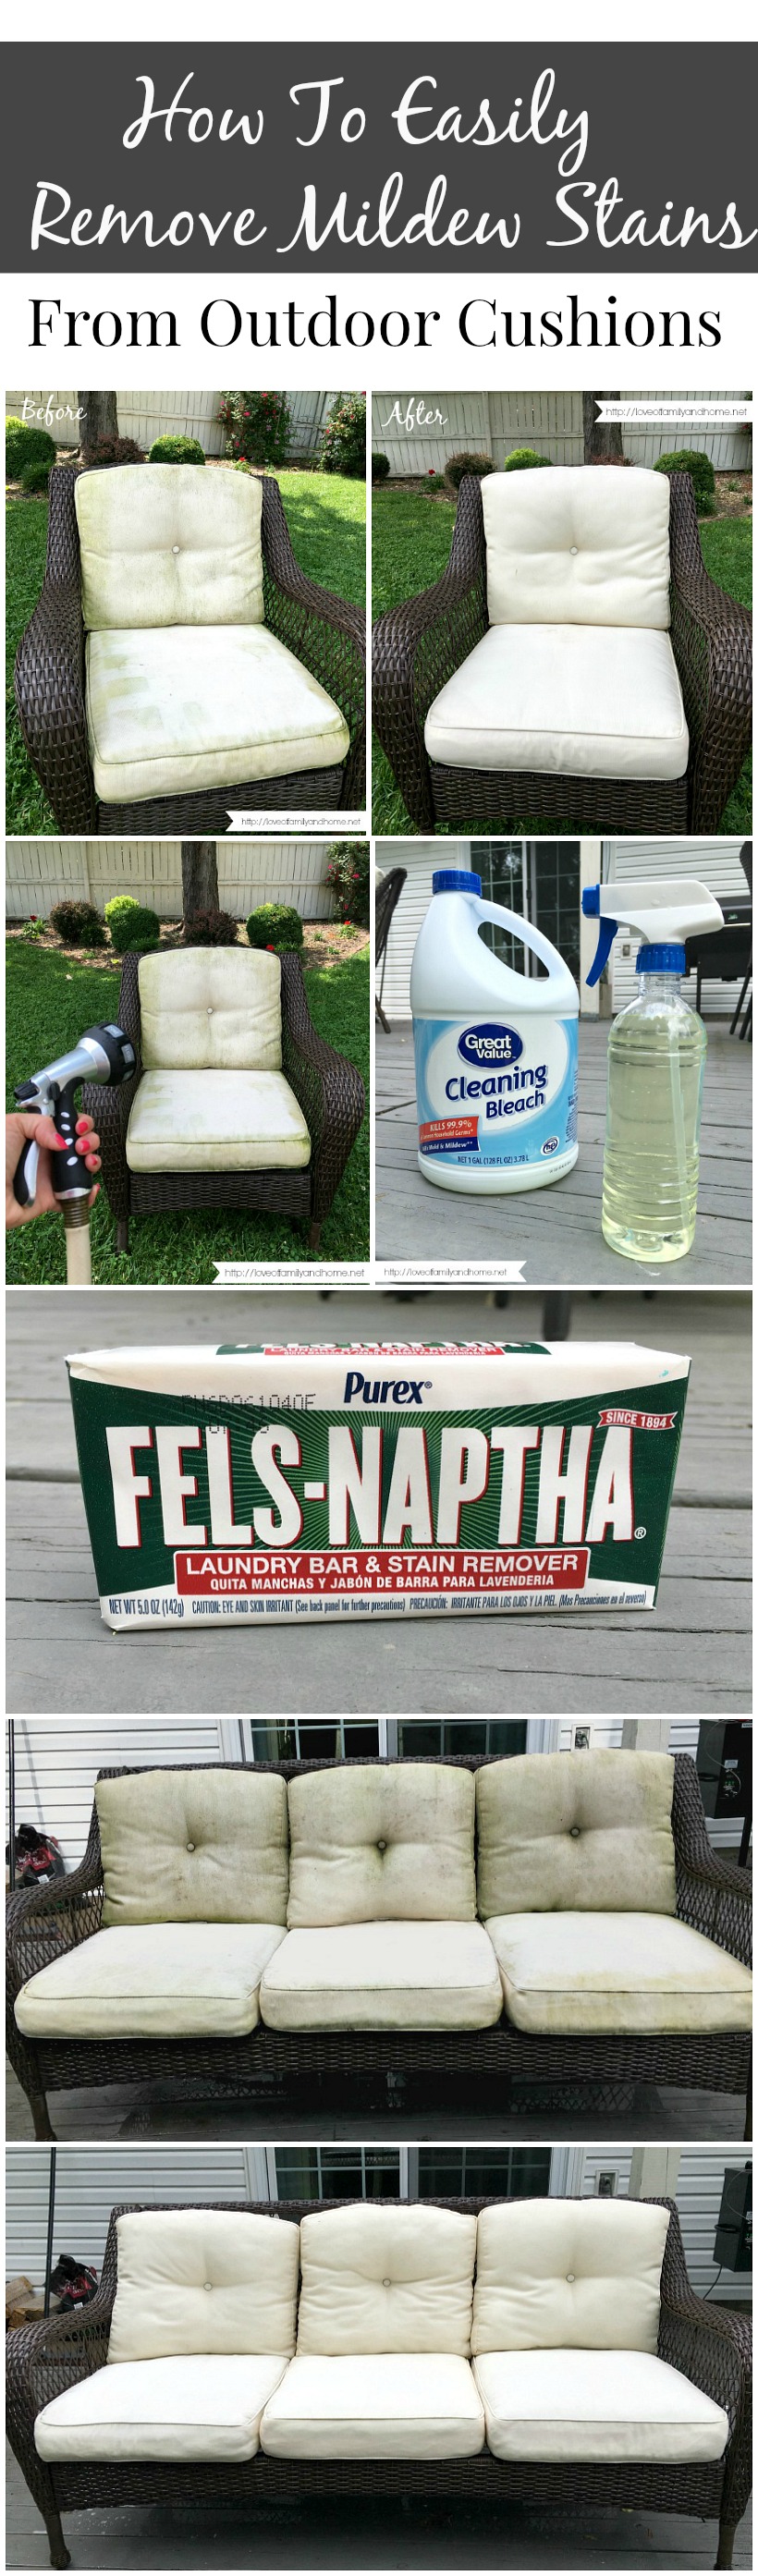 Remove Mildew Stains From Outdoor Cushions, How To Remove Mold From Patio Furniture Fabric